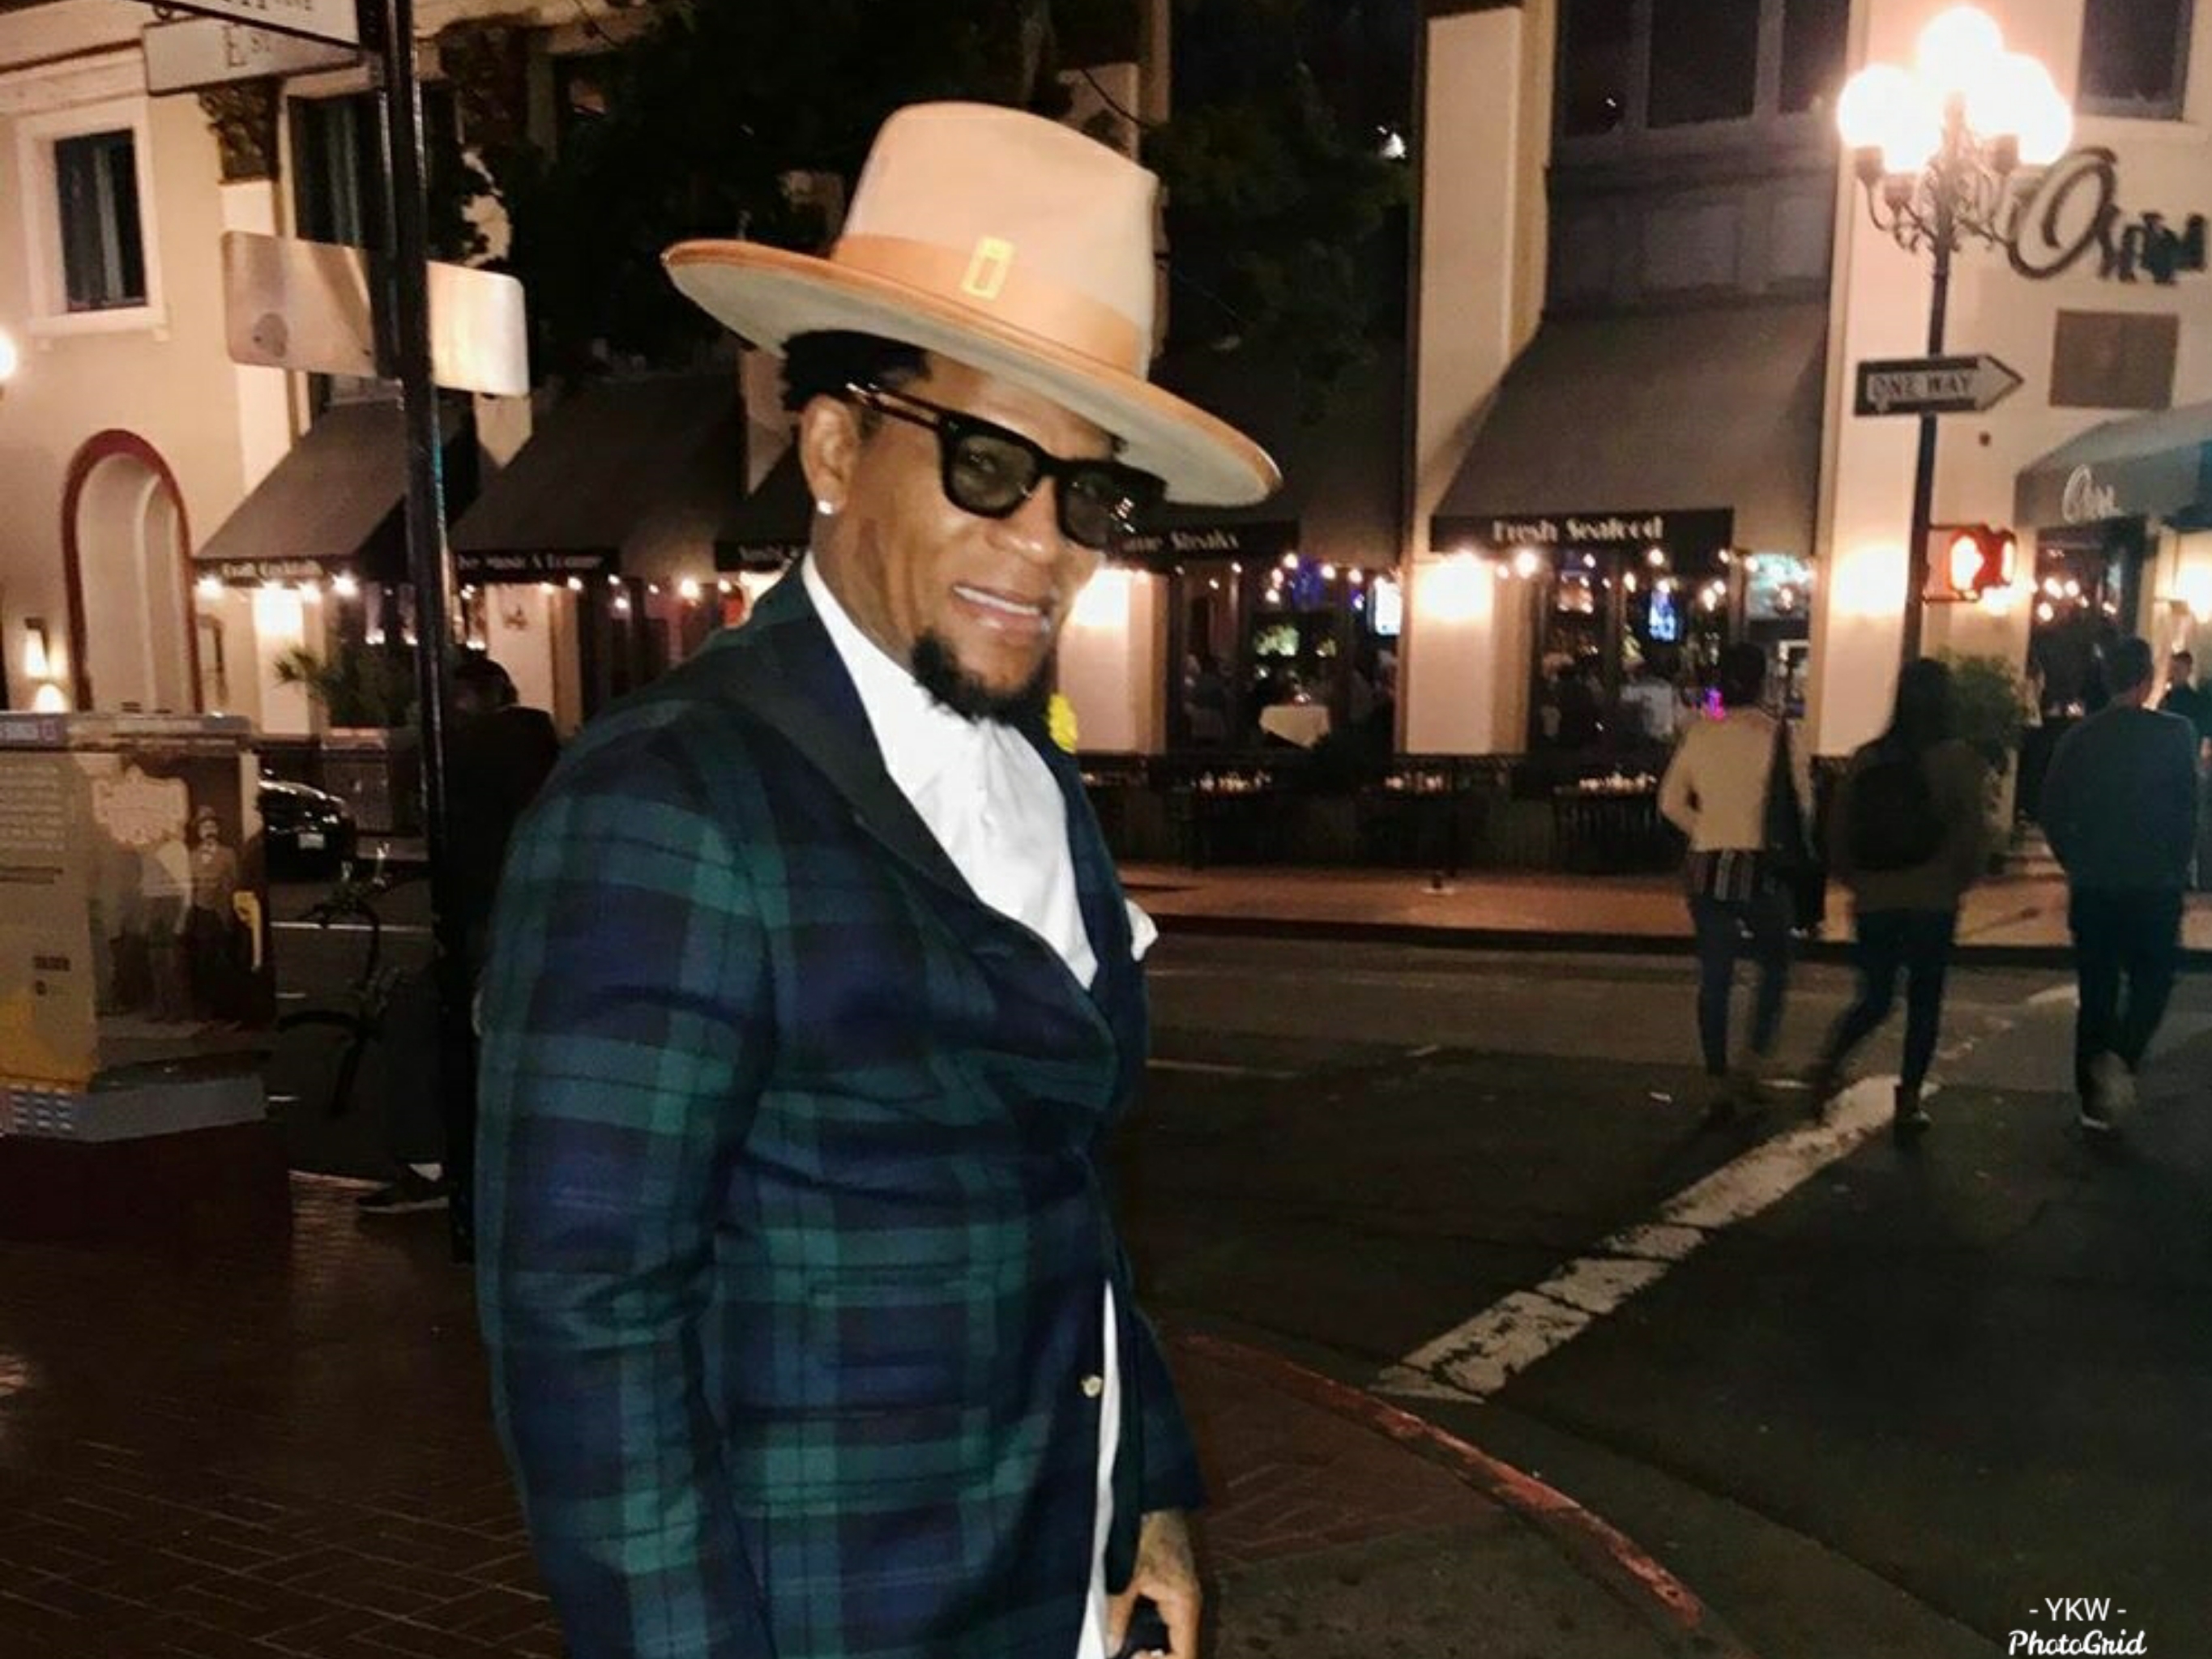 D.L. Hughley Collapses On Stage During Nashville Comedy Show, Rep Says “He Is Gonna Be Okay”